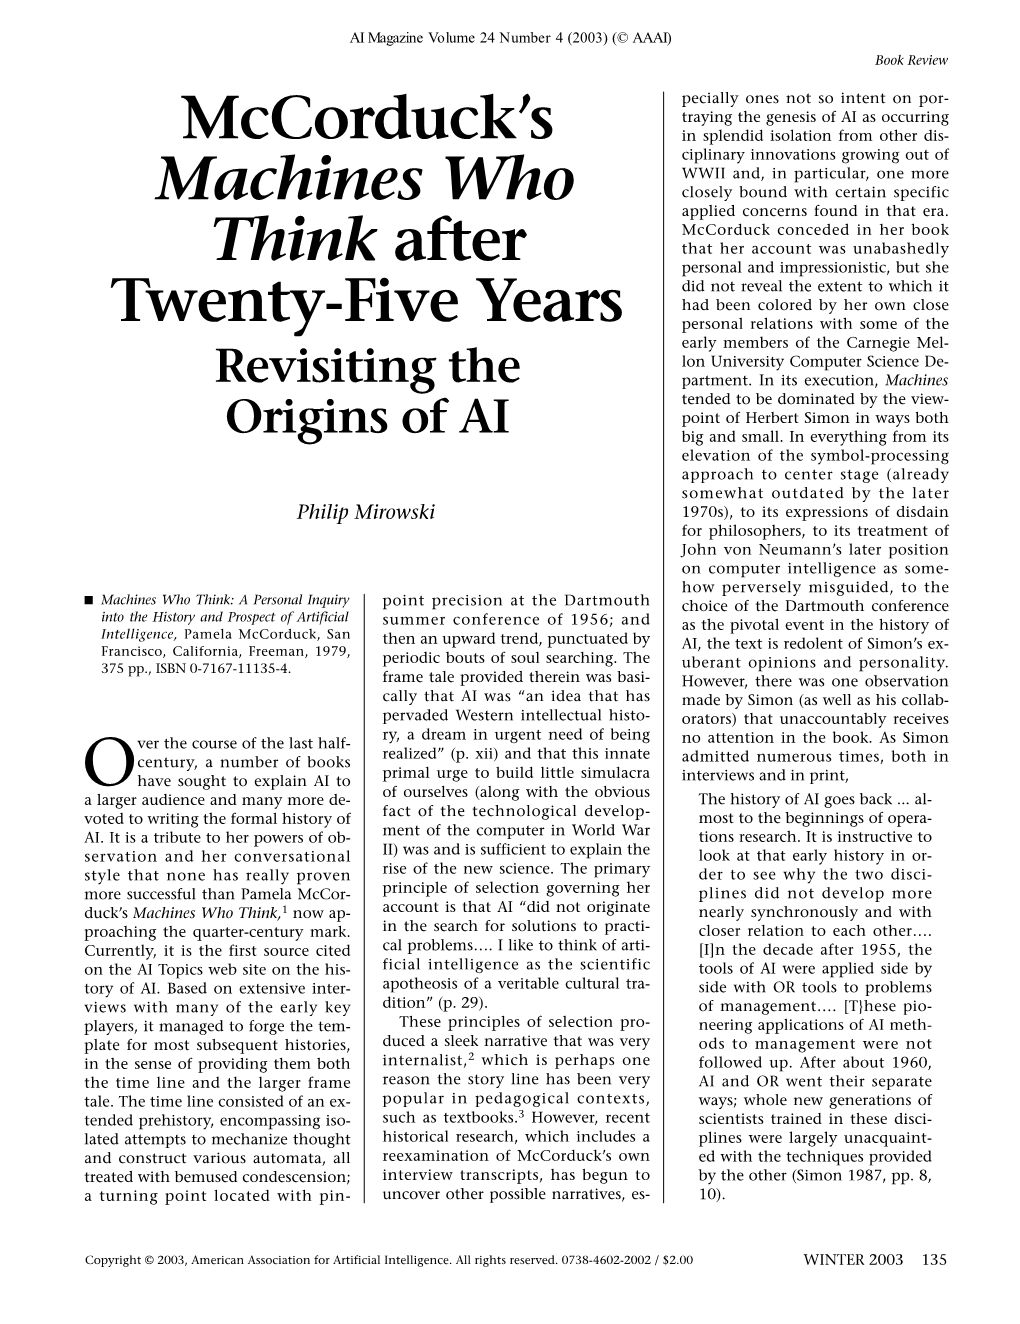 Mccorduck's-Machines Who-Think After-Twenty-Five Years-Revisiting